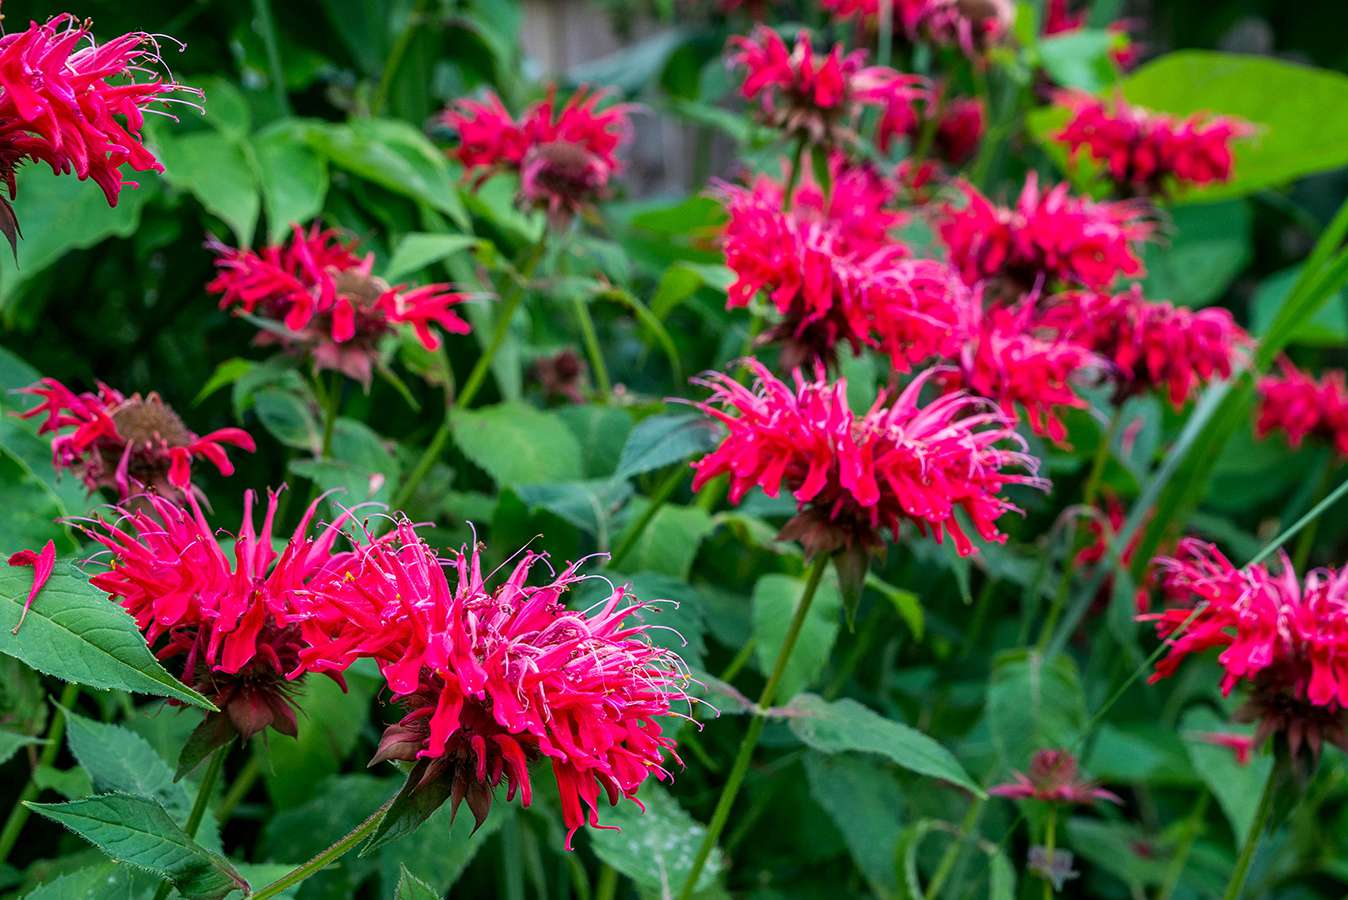 beebalm - Plants That Repel Mosquitoes